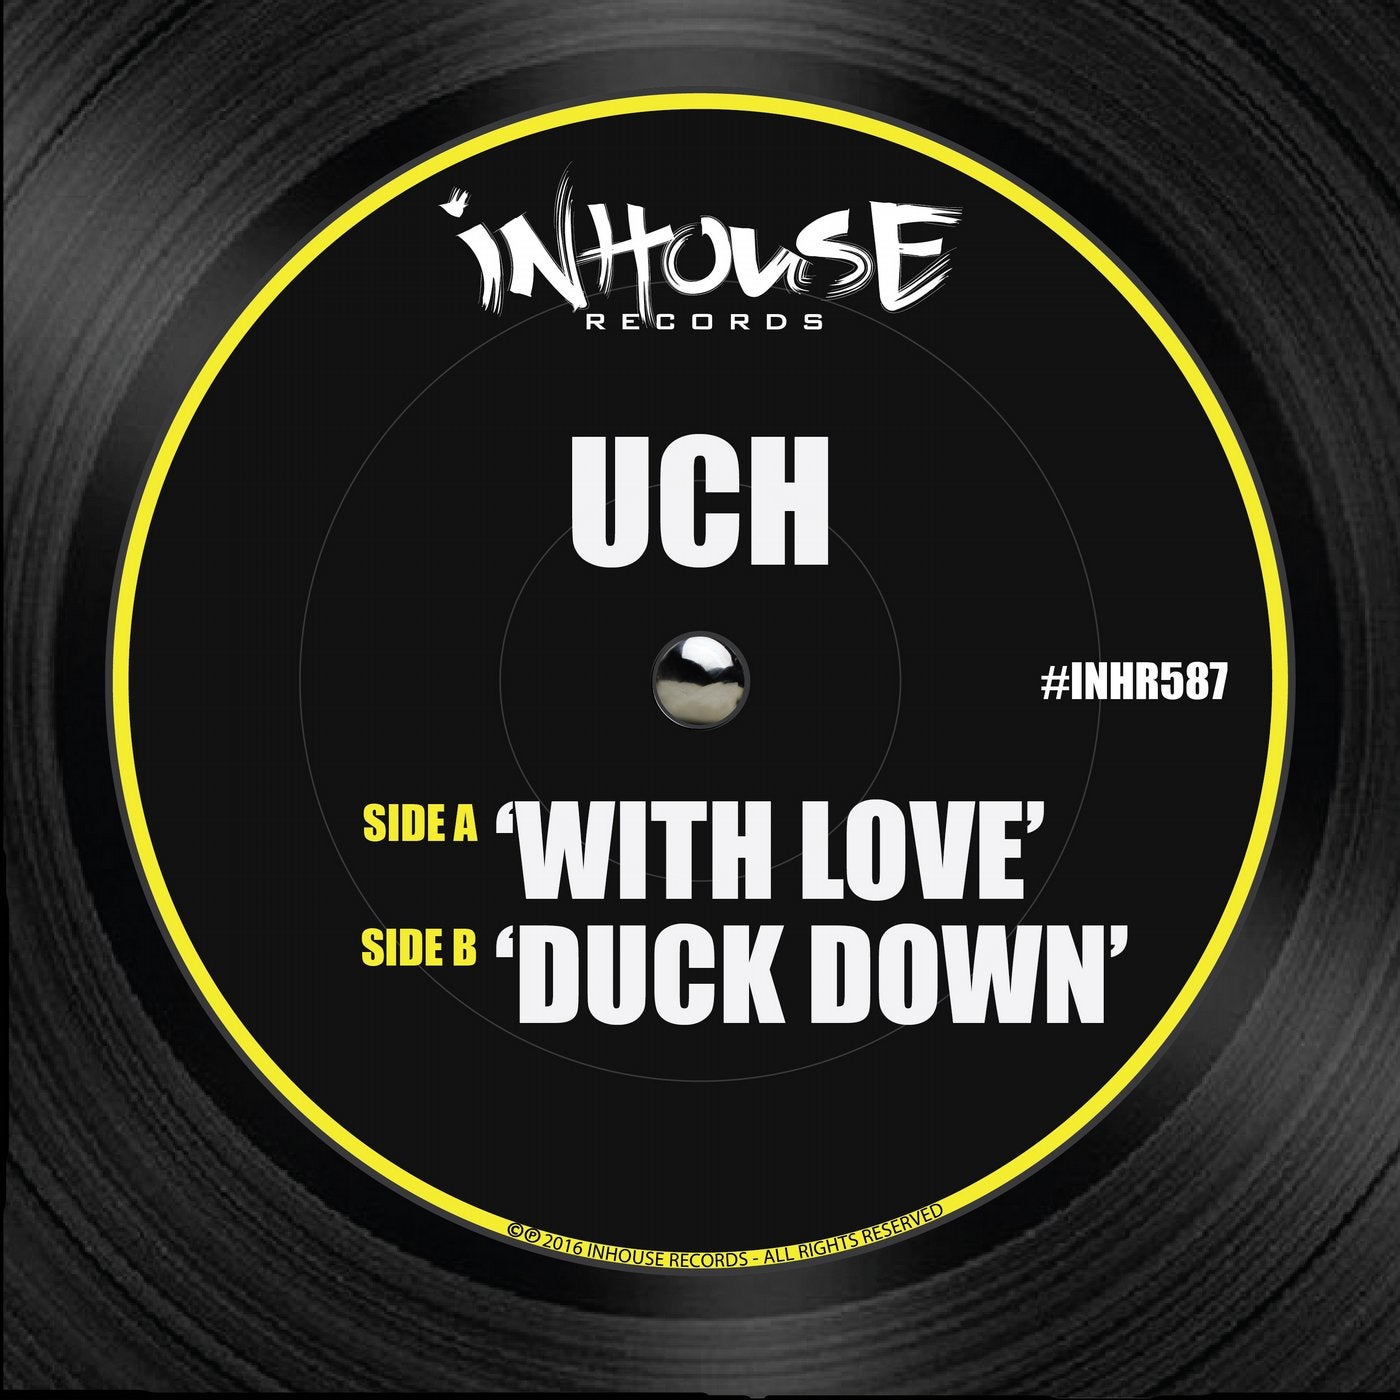 With Love - Duck Down